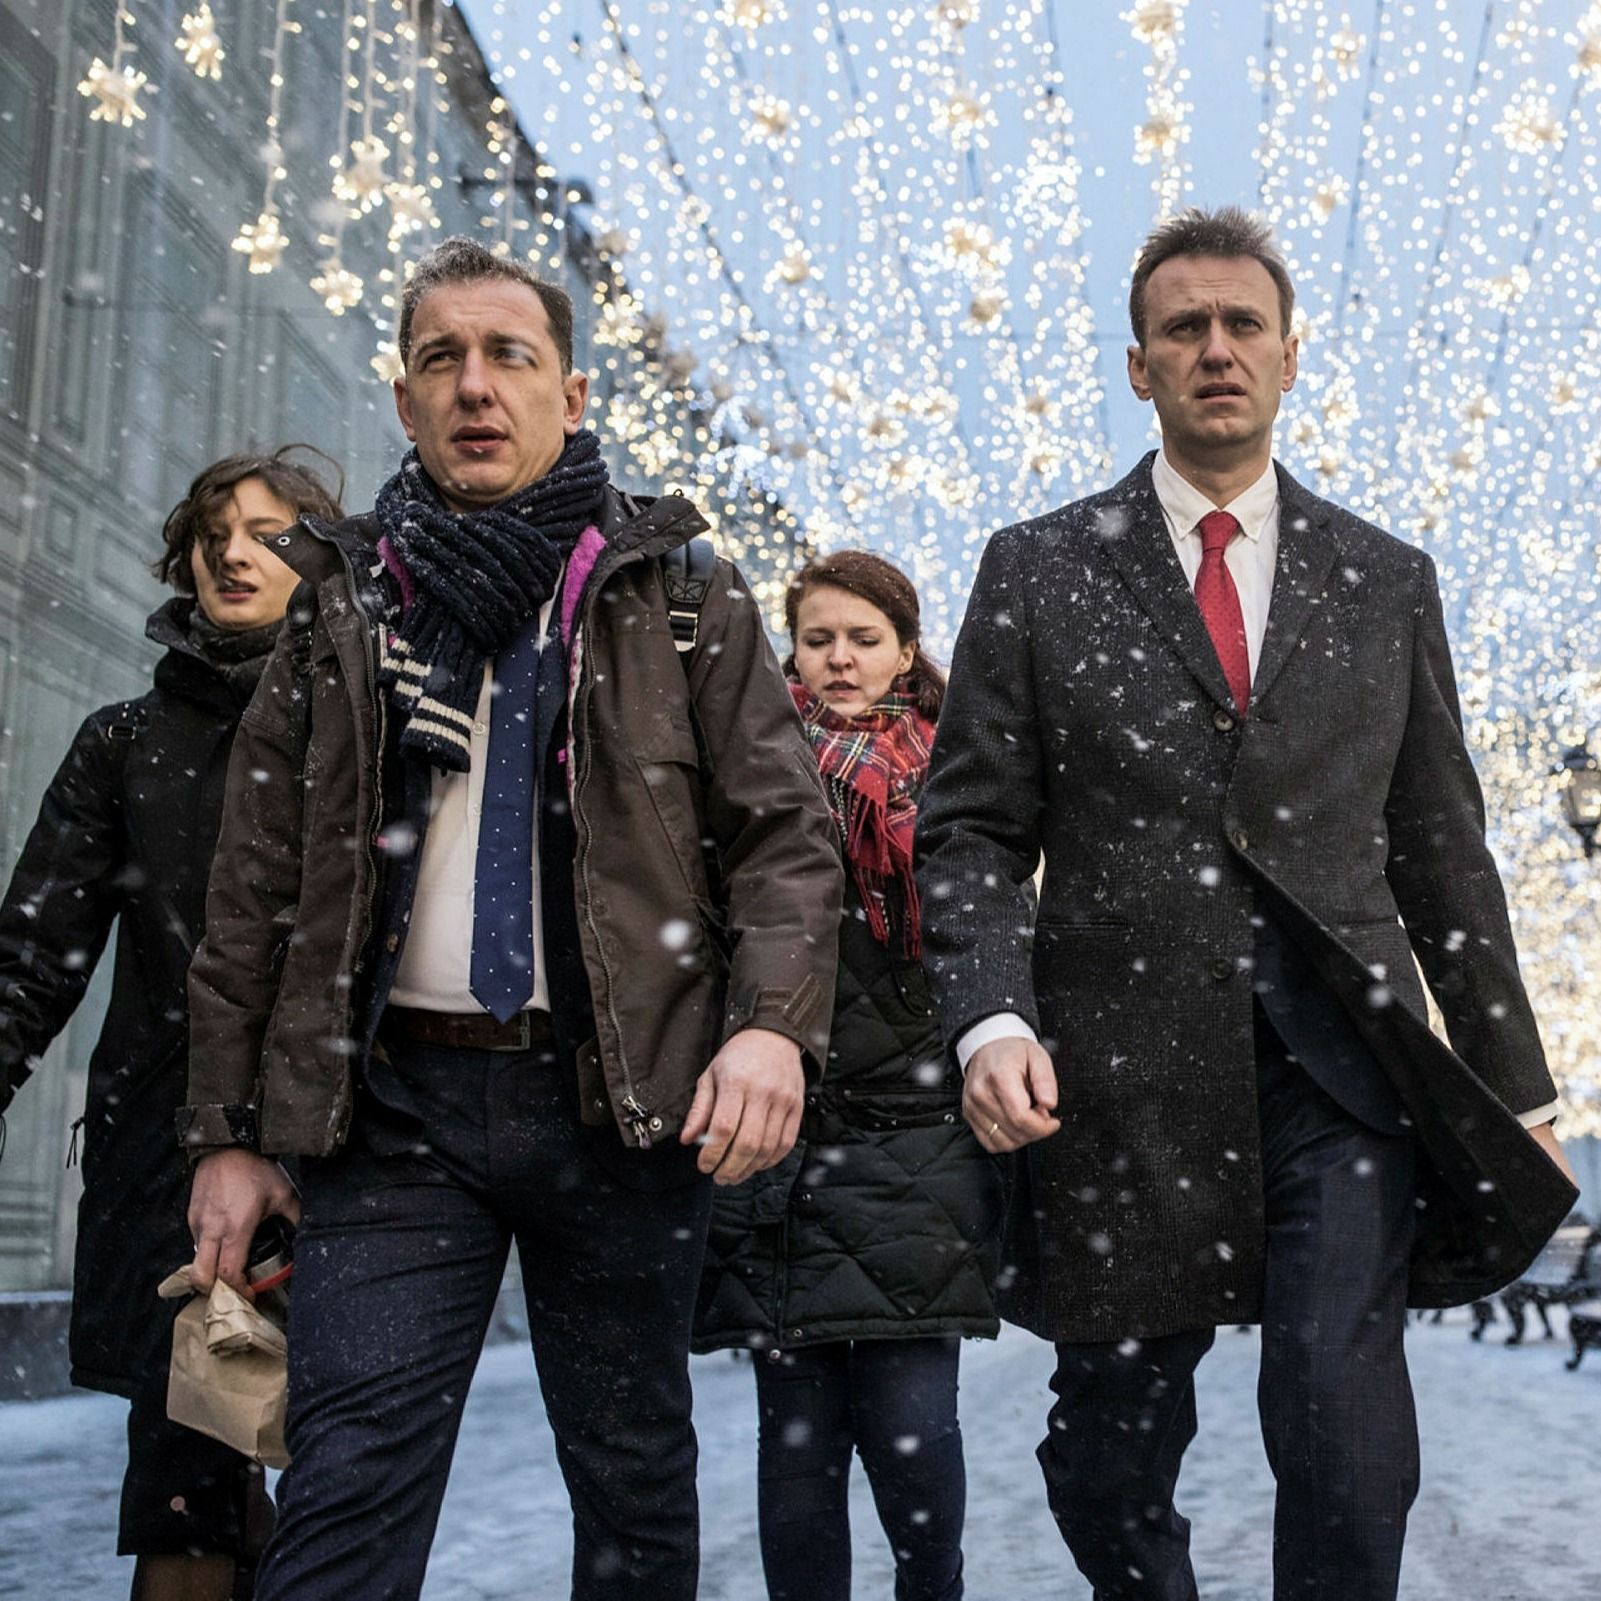 Alexei Navalny, centre, heads to attend a meeting of Russia’s Central Election commission in Moscow in 2017